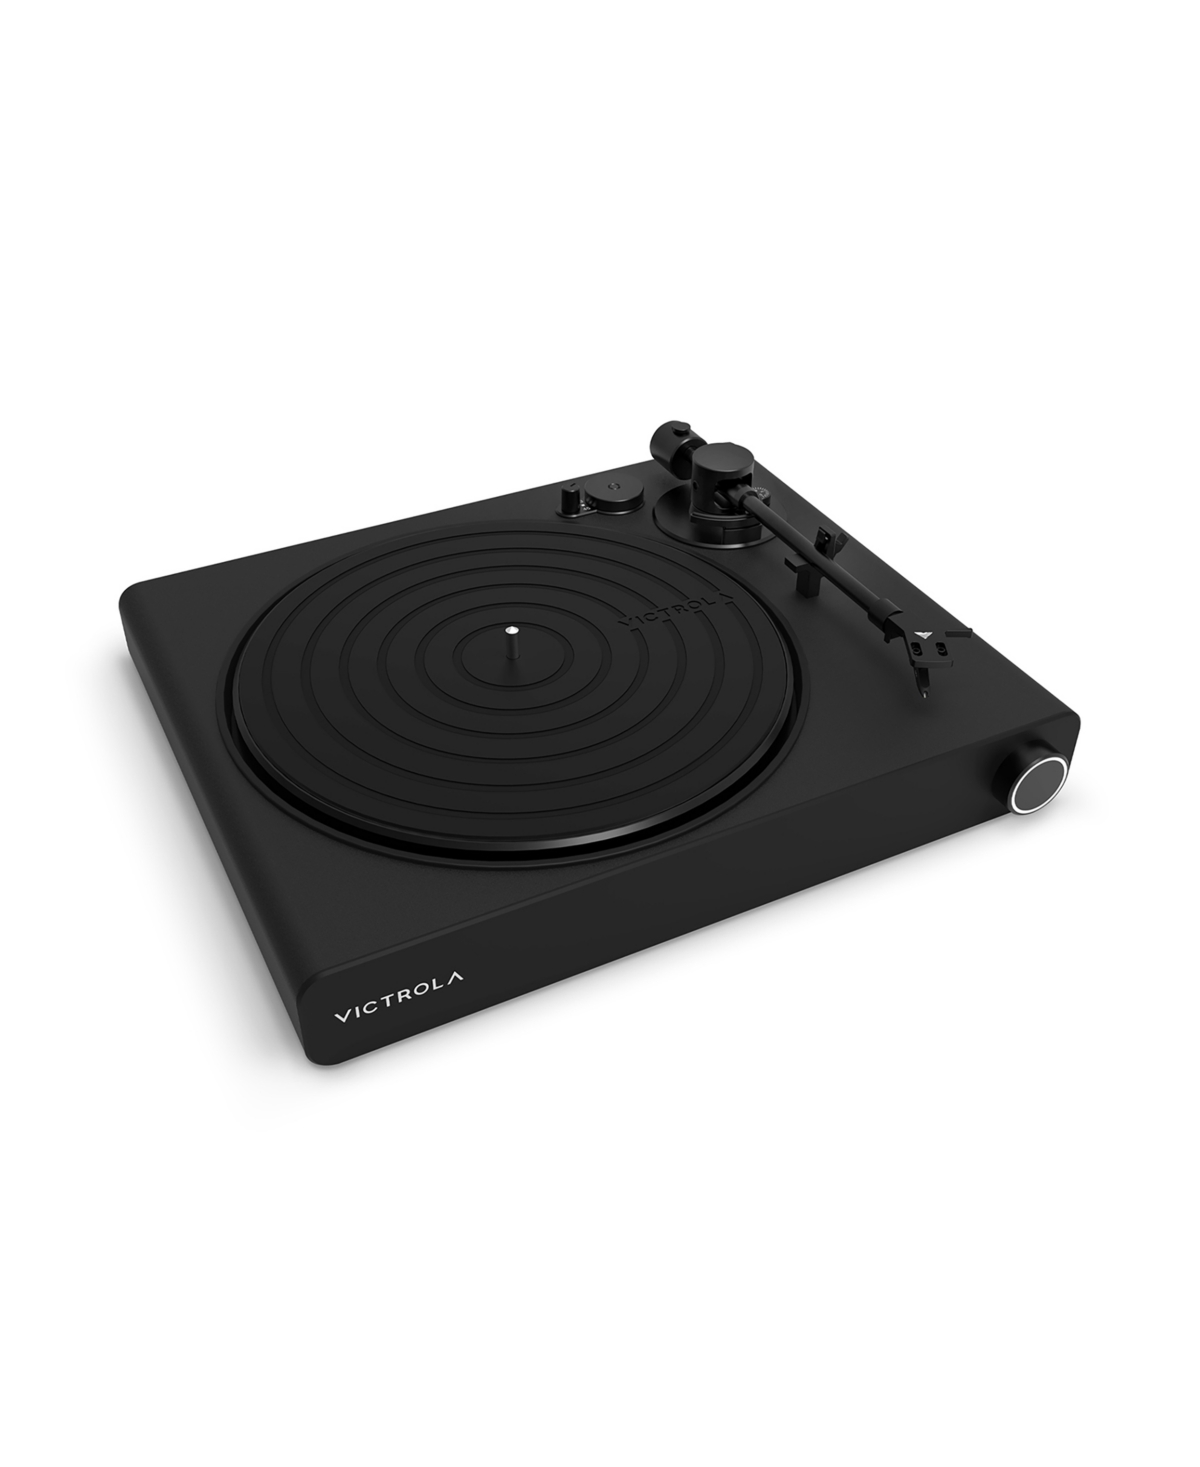 Victrola Stream Onyx Works With Sonos Turntable In Black